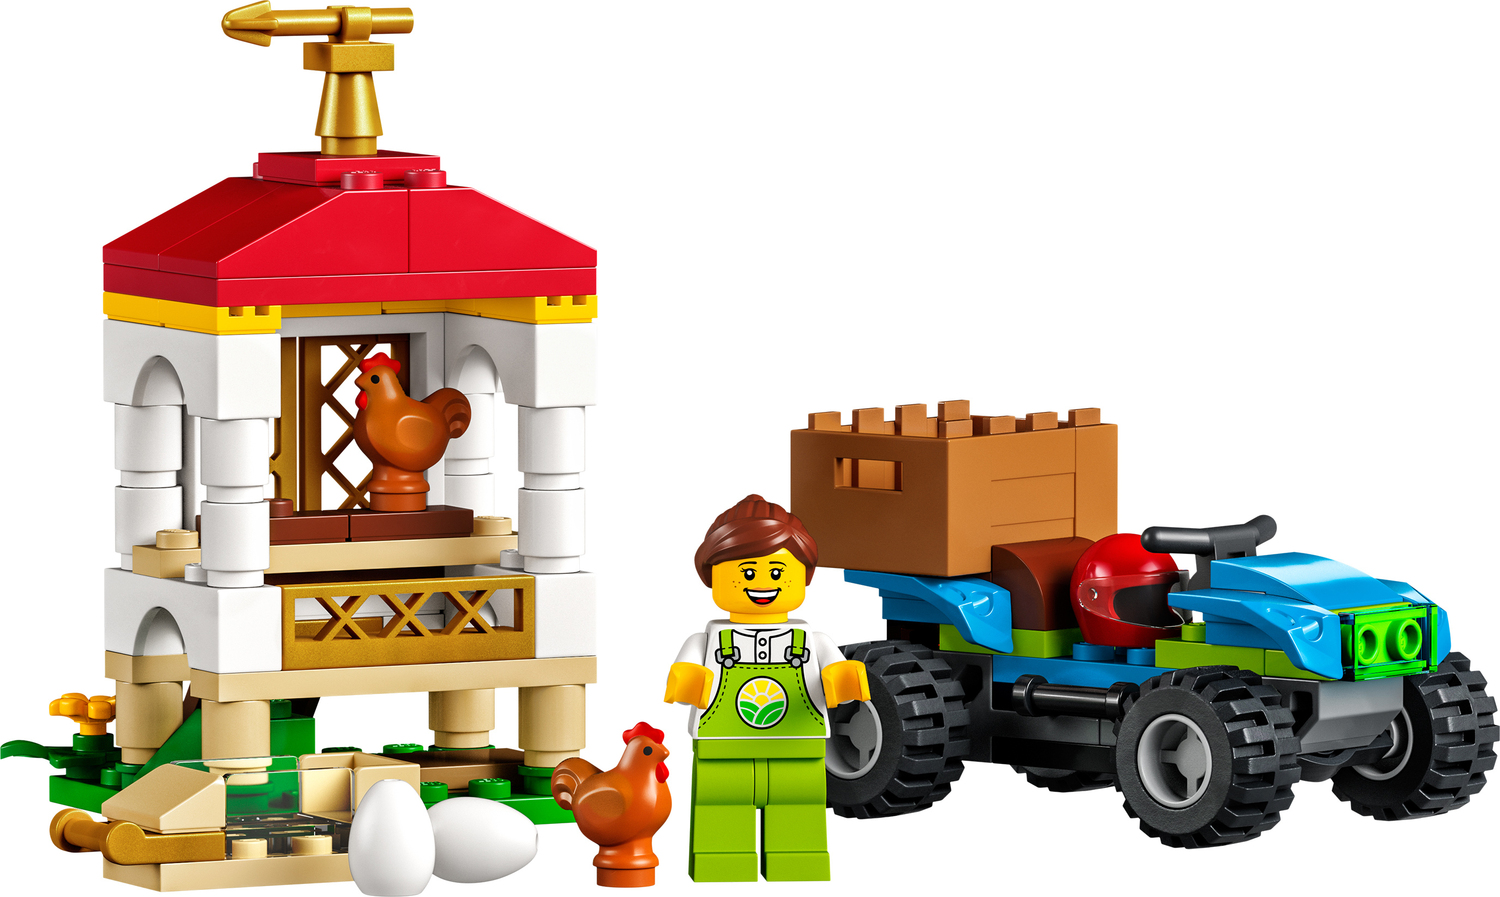 LEGO City Chicken Henhouse Toy for Kids - Givens Books and